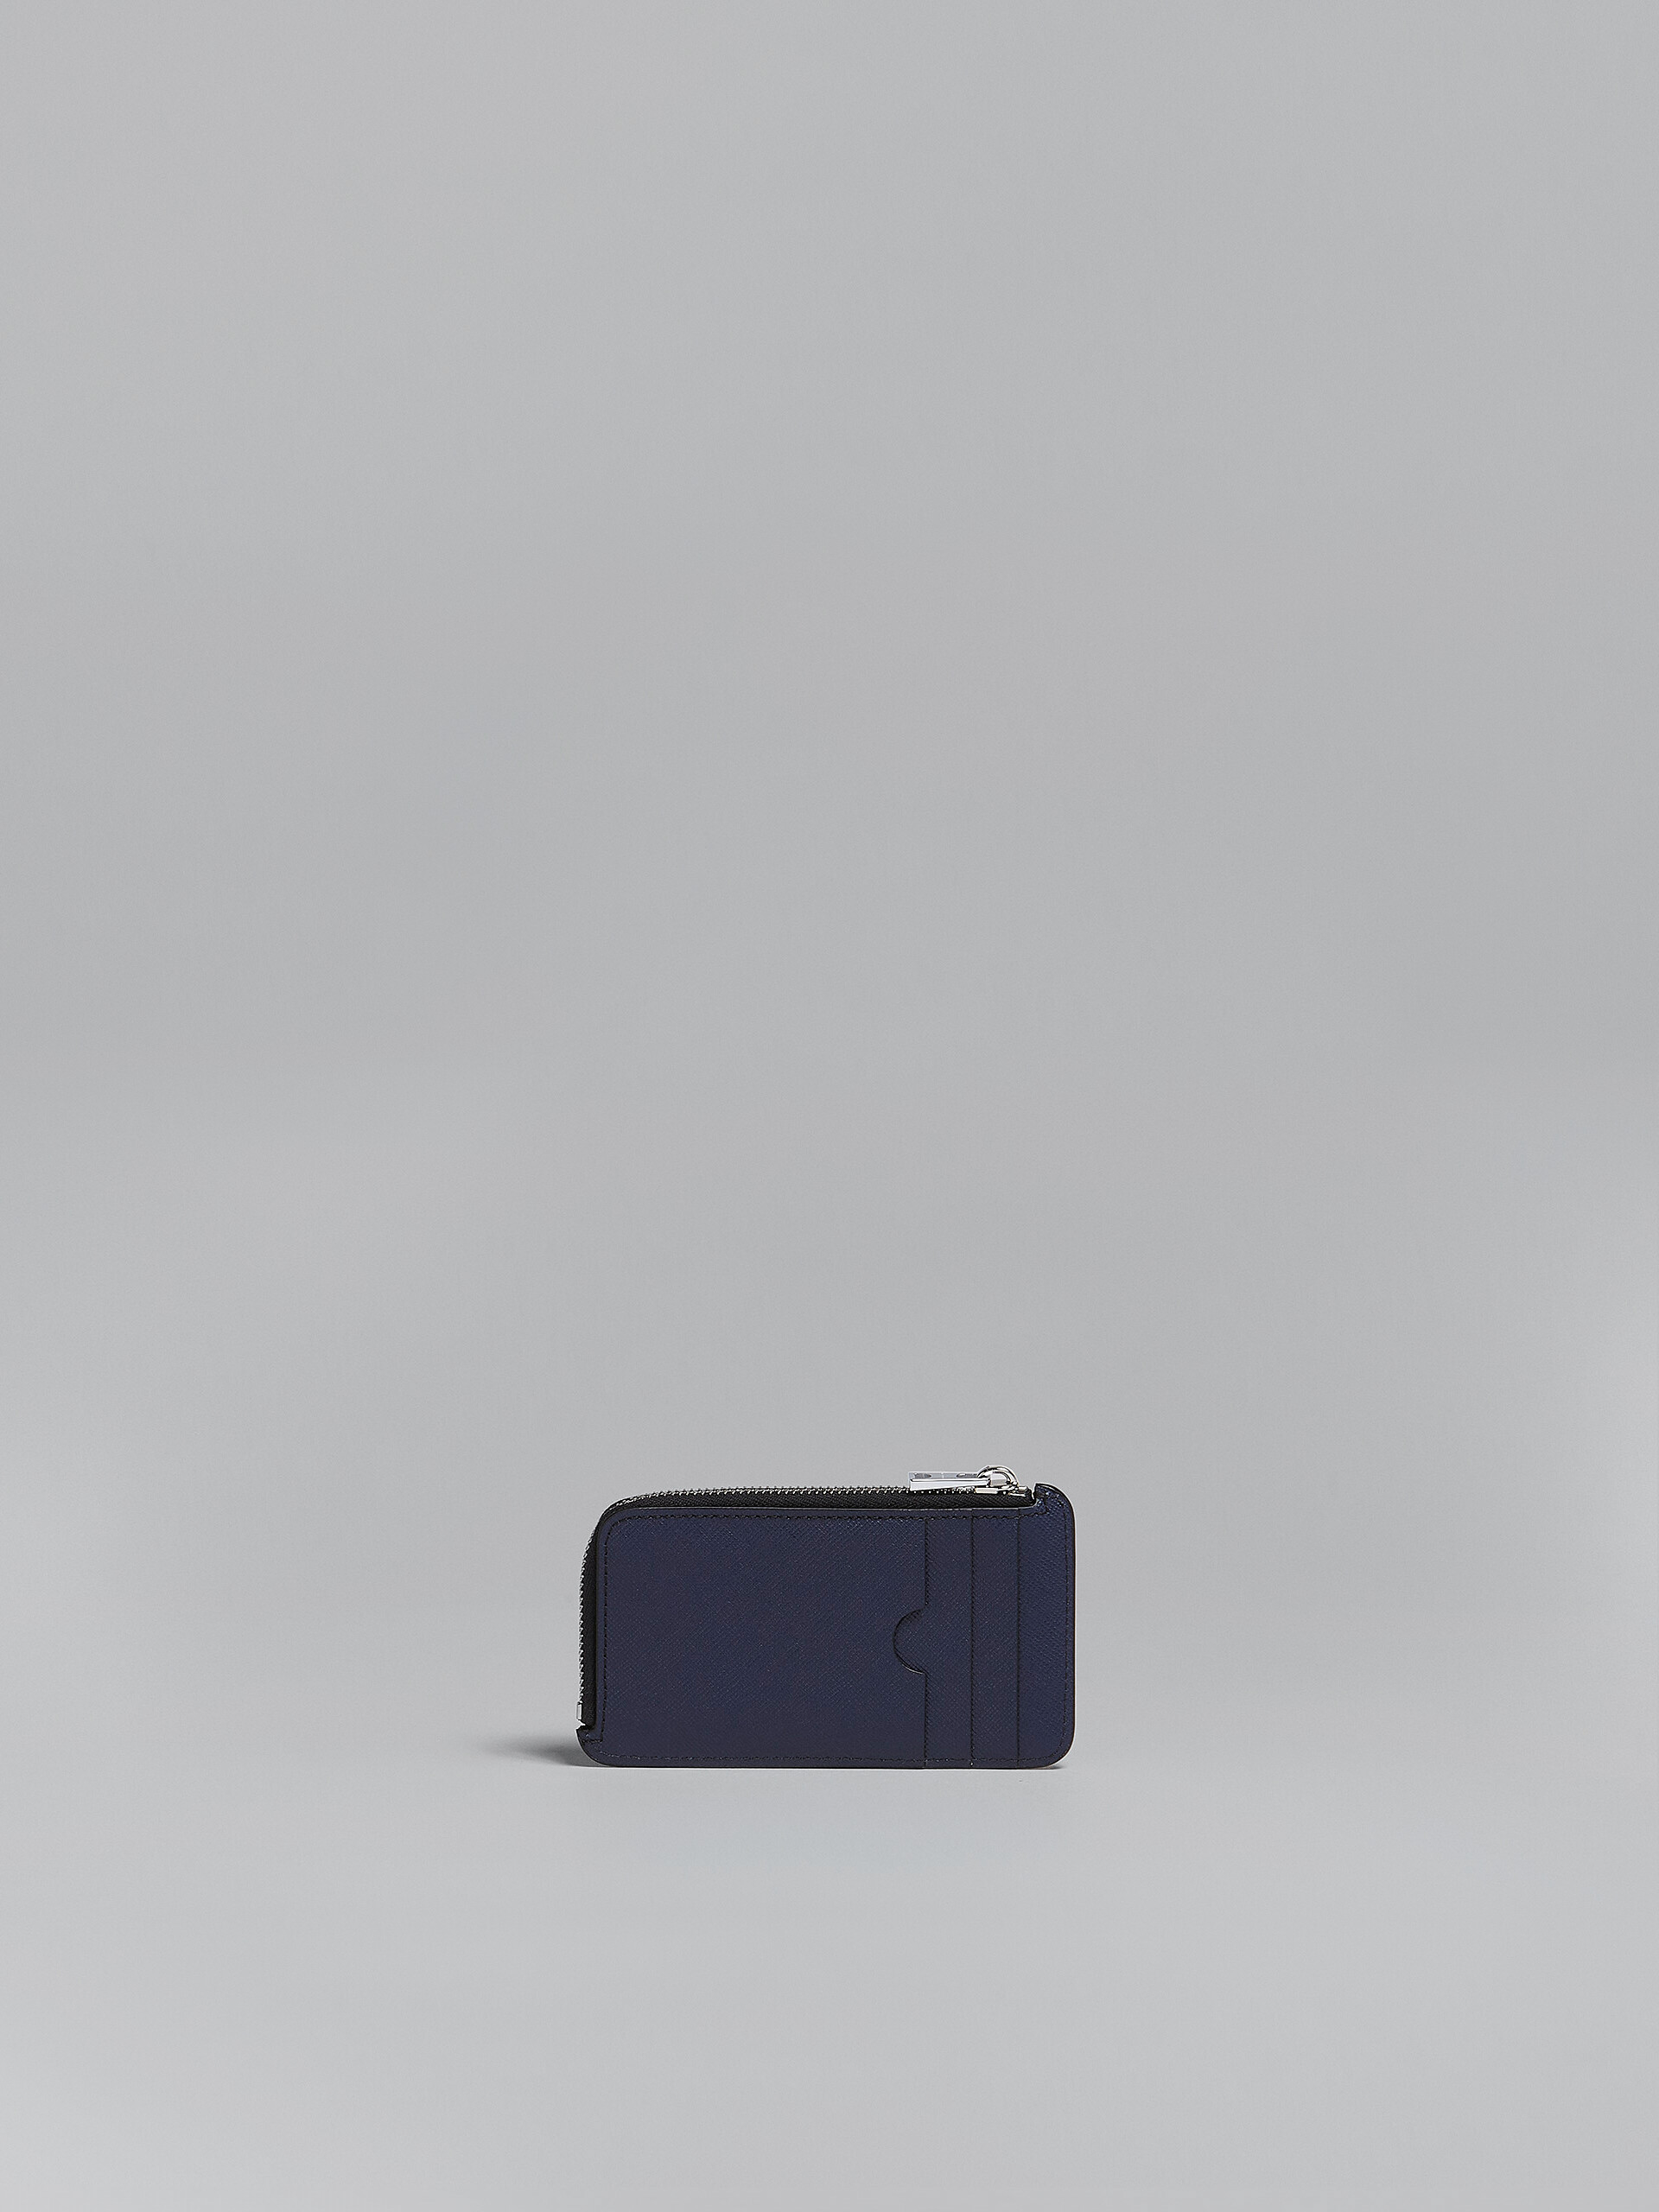 Blue and black saffiano leather zip-around card case - Wallets - Image 3